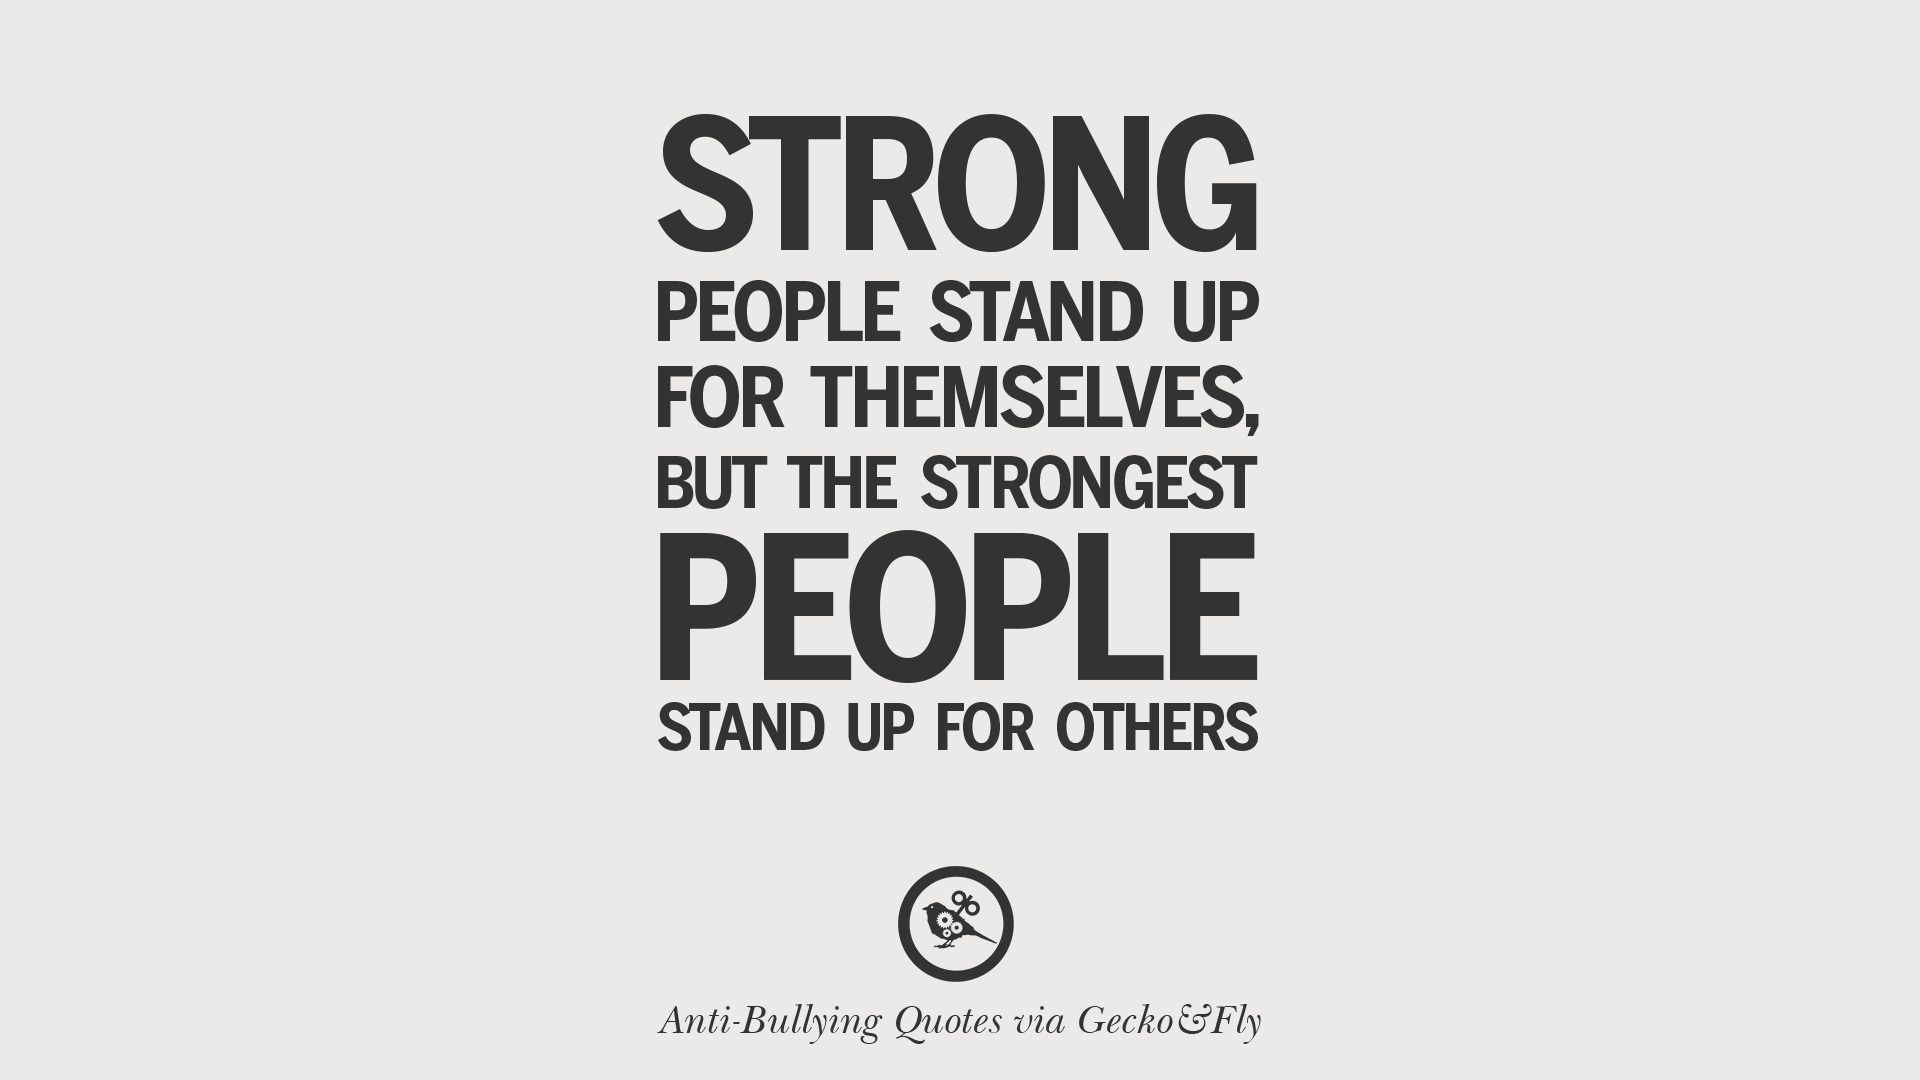 STOP BULLYING!. Bullying quotes, Anti bully quotes, Cyber bullying quotes